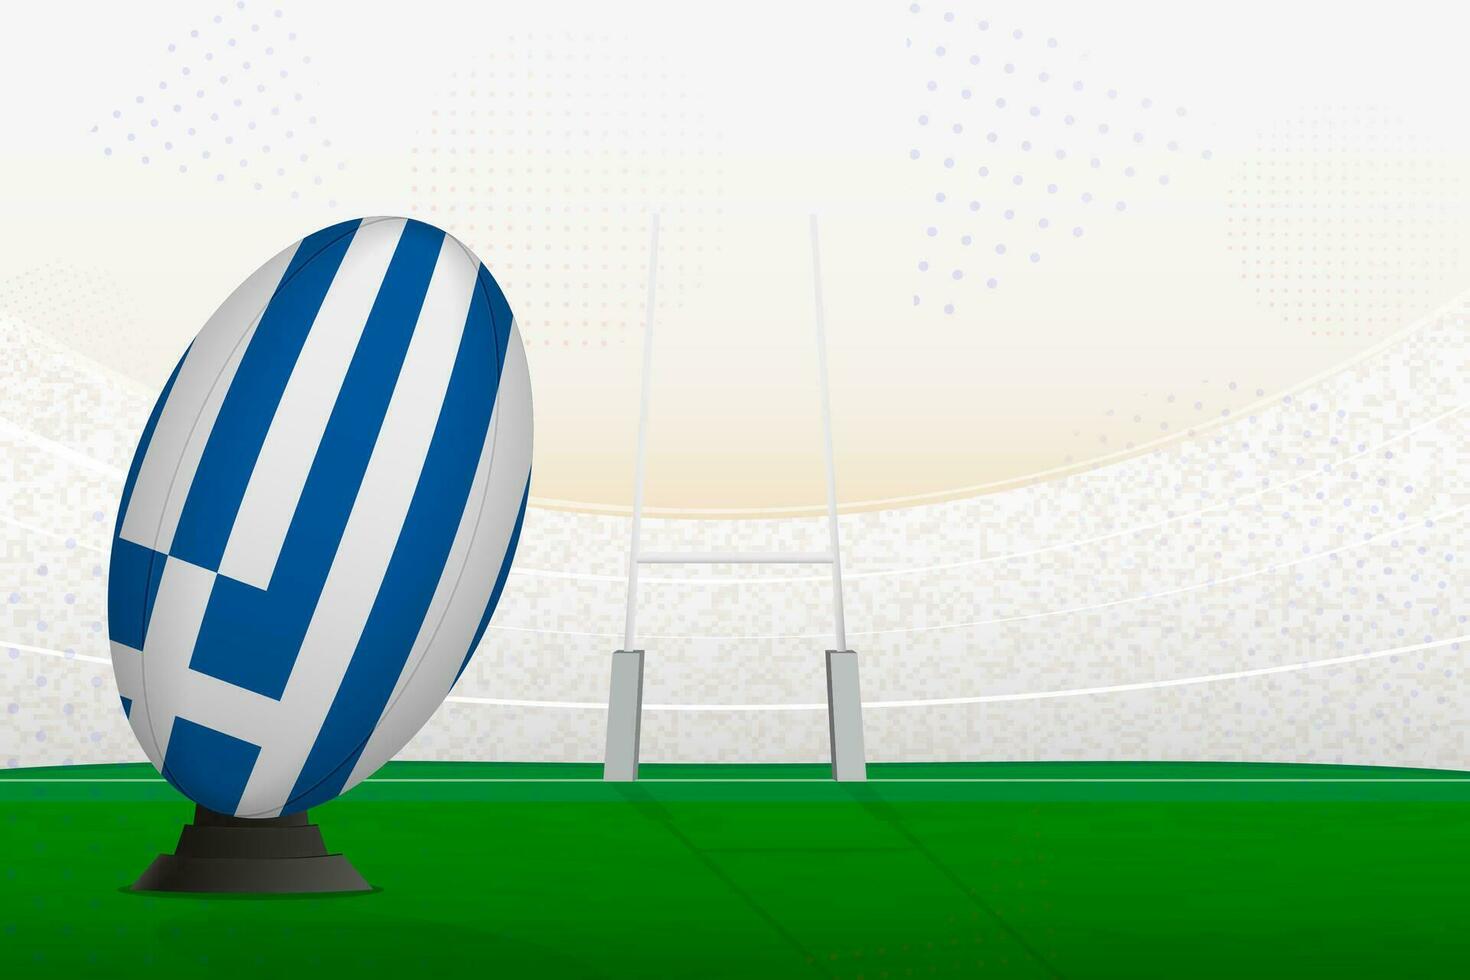 Greece national team rugby ball on rugby stadium and goal posts, preparing for a penalty or free kick. vector